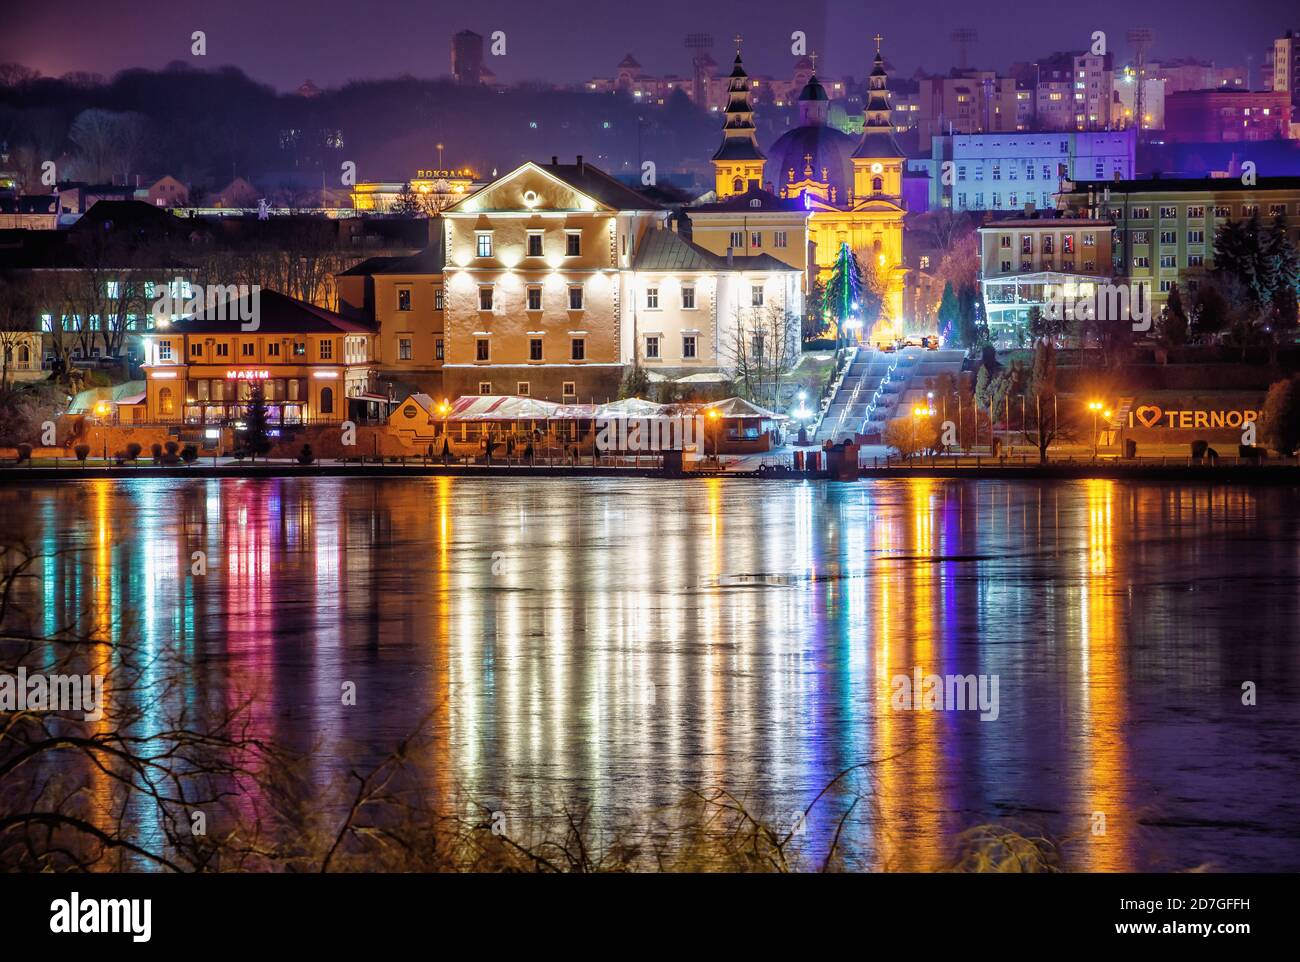 Ternopil, Ukraine 01.05.2020. Panoramic view of Ternopil pond and castle in Ternopol, Ukraine, on a winter night Stock Photo